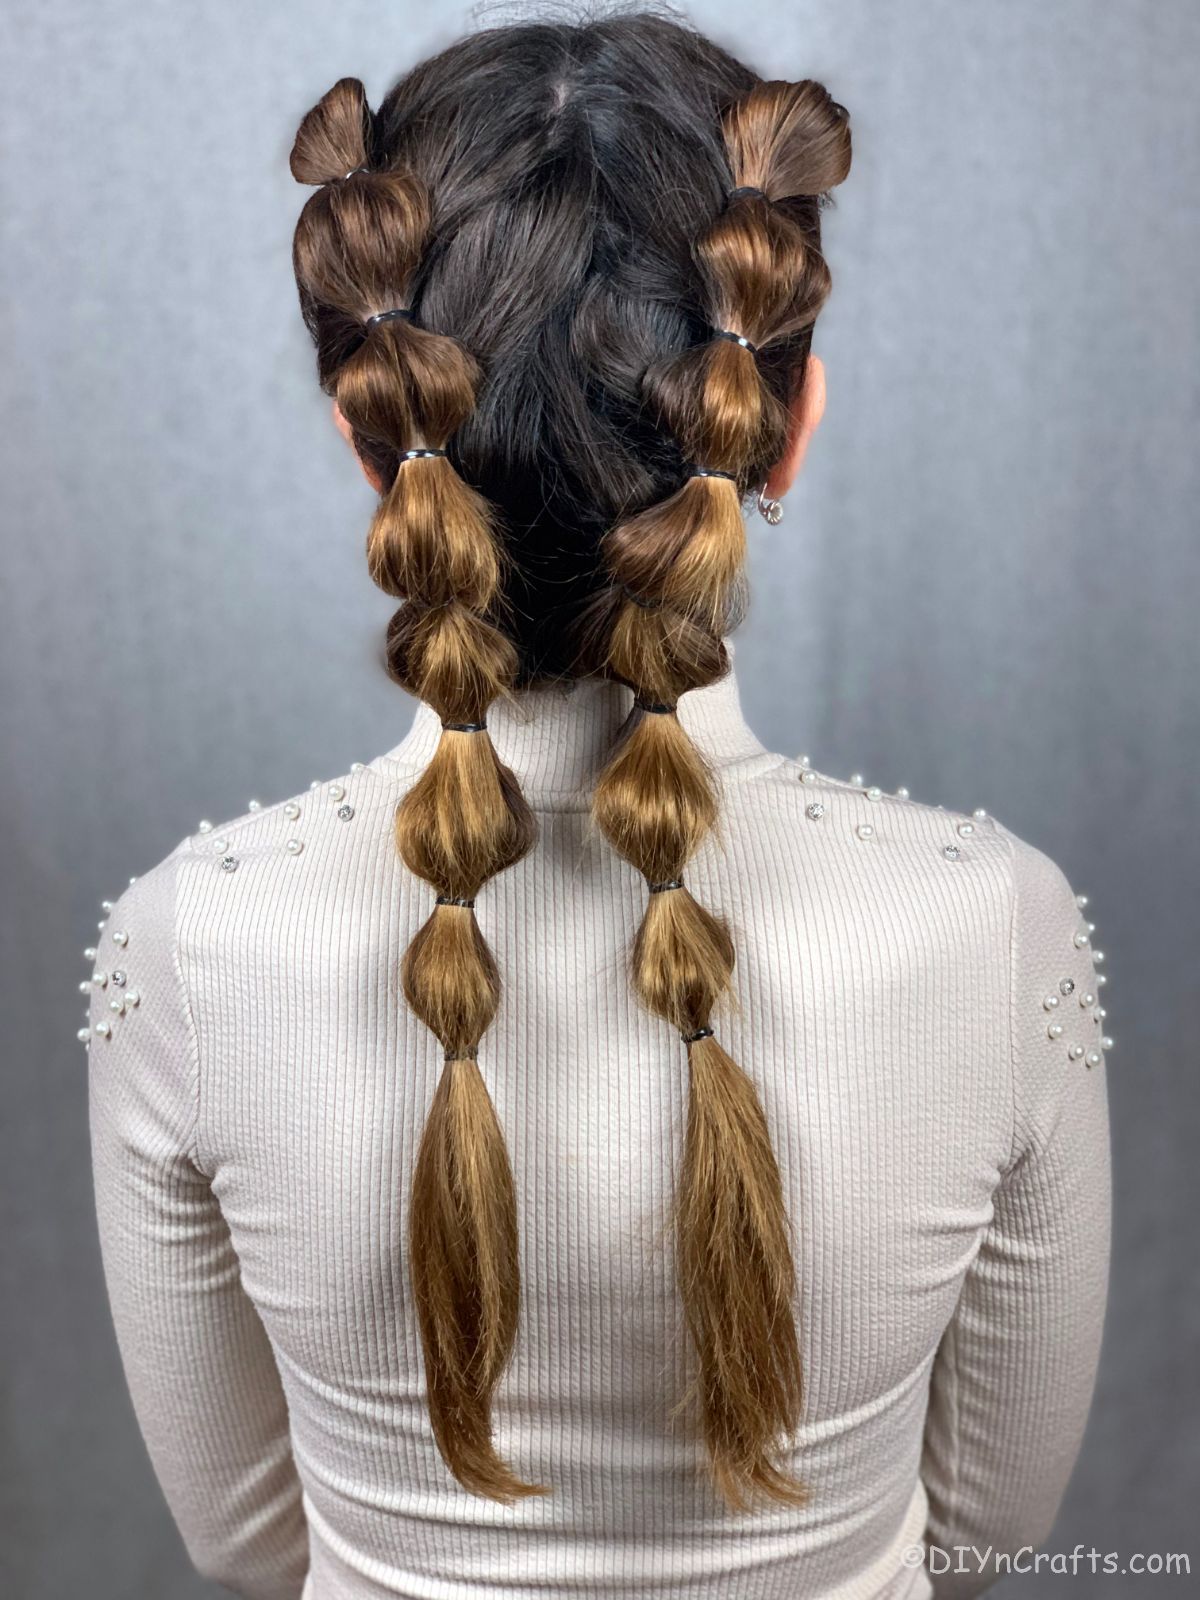 5 HAIRSTYLES THAT ARE SECRETLY DAMAGING YOUR HAIR  Jet Club